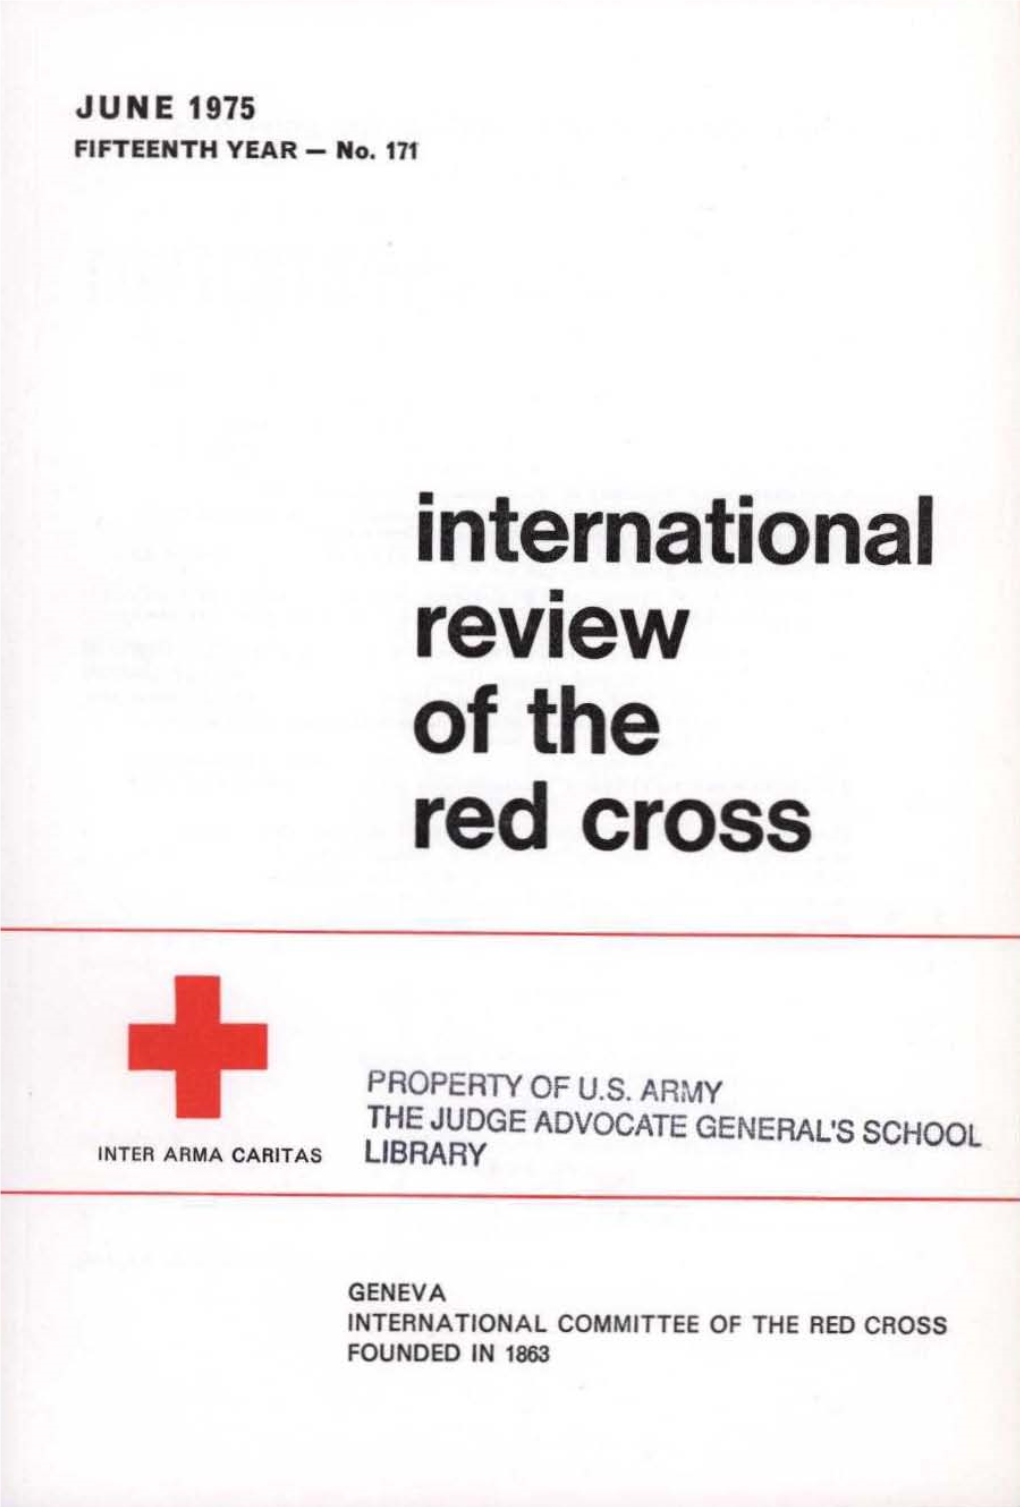 International Review of the Red Cross, June 1975, Fifteenth Year